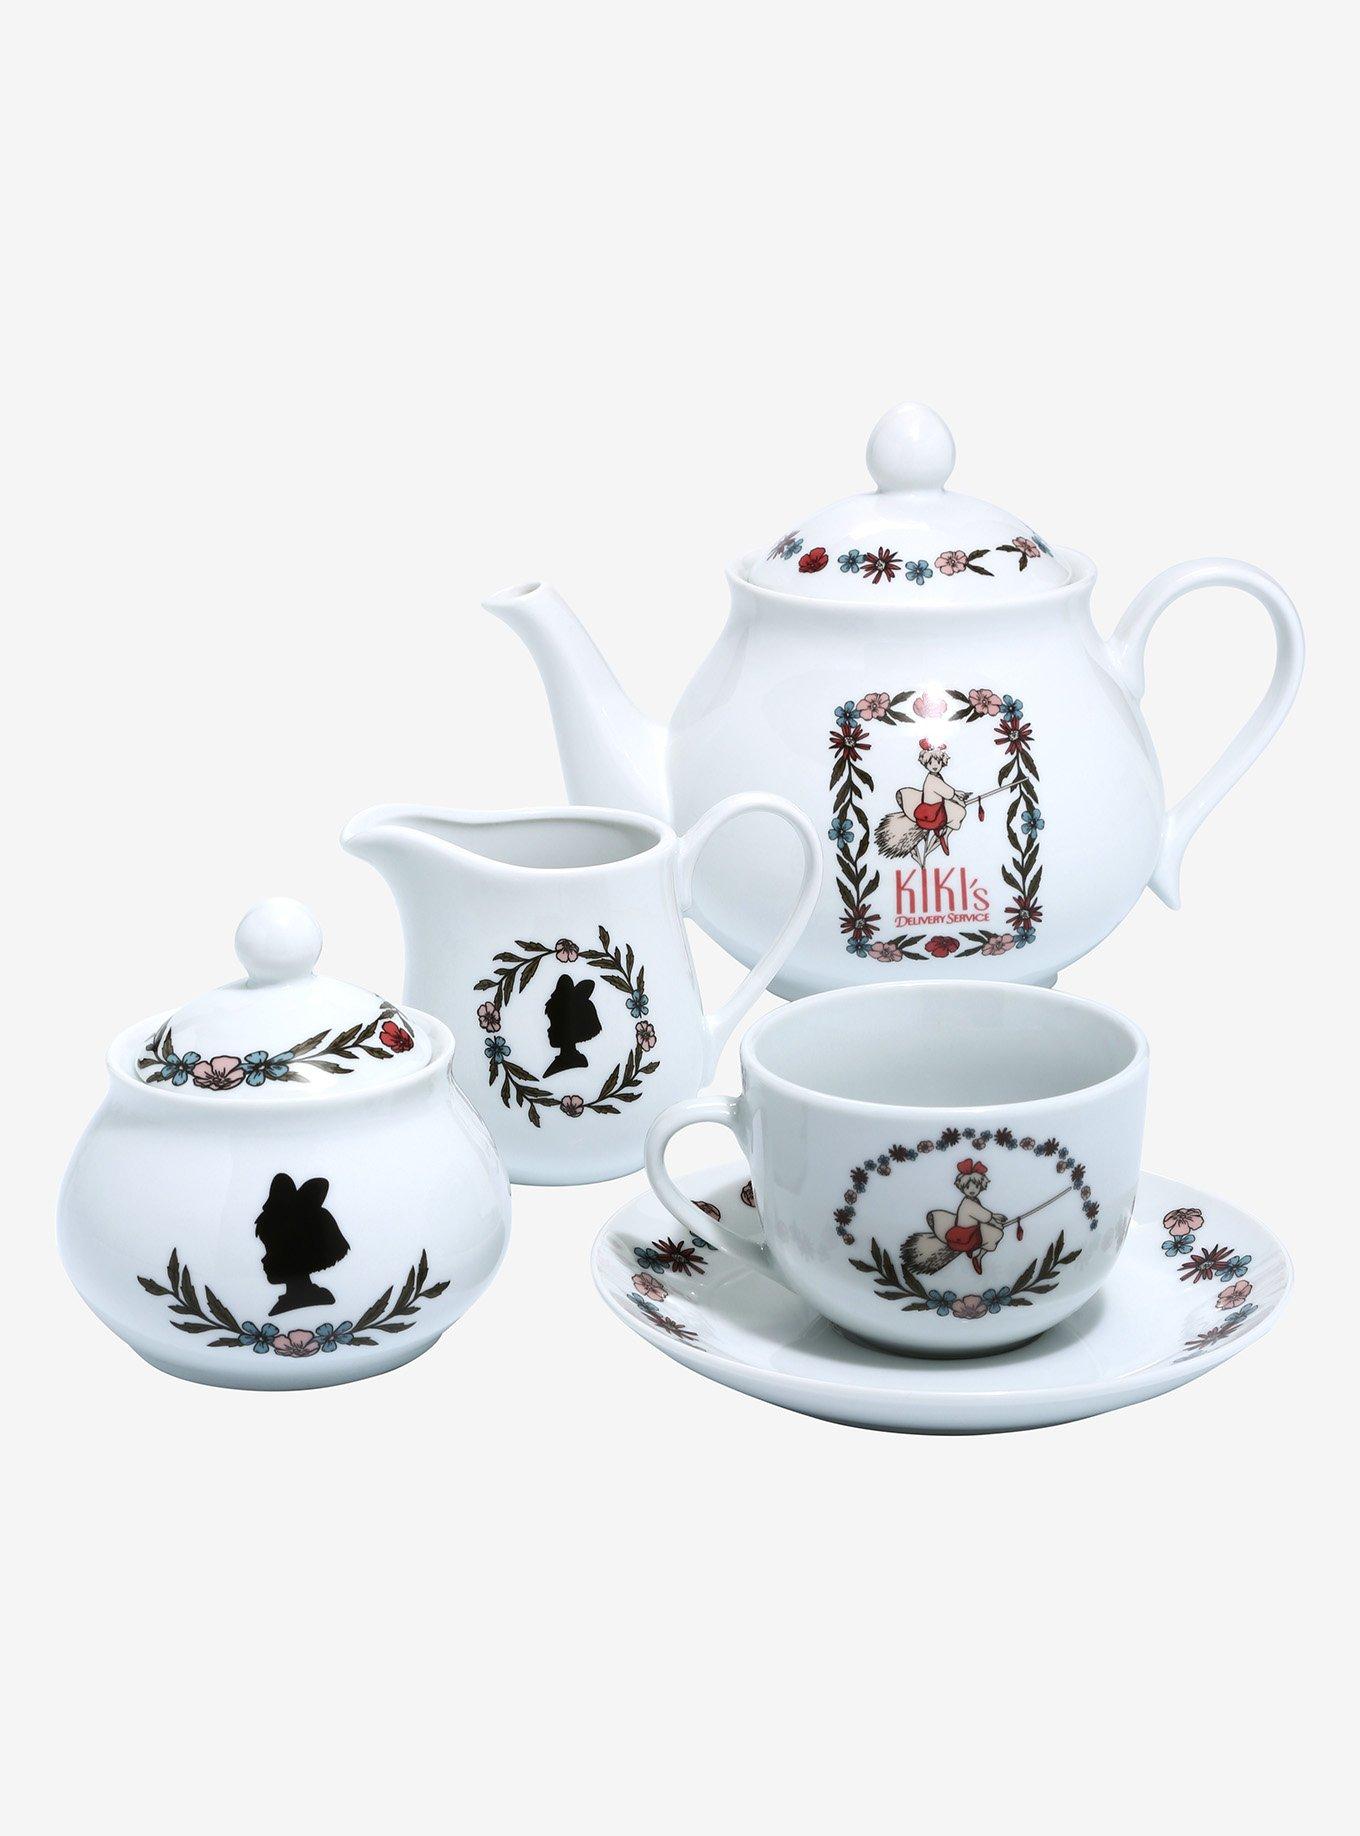 Discover the Delightful Pip Studio Tea Set at Top Drawer